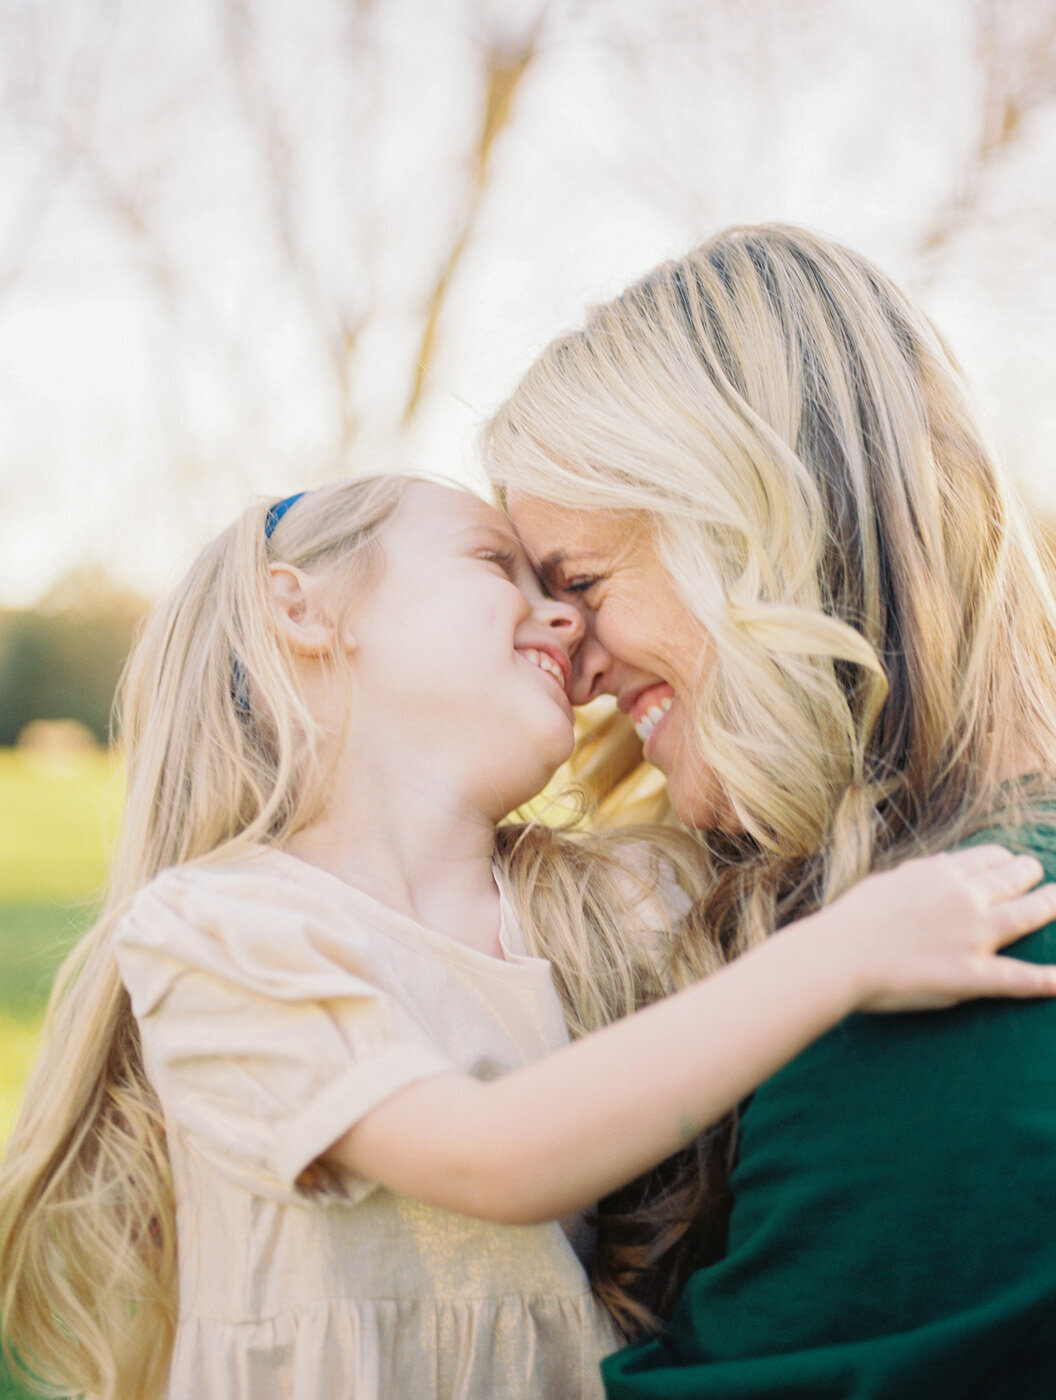 Raleigh Family Photographer | Jessica Agee Photography - 018